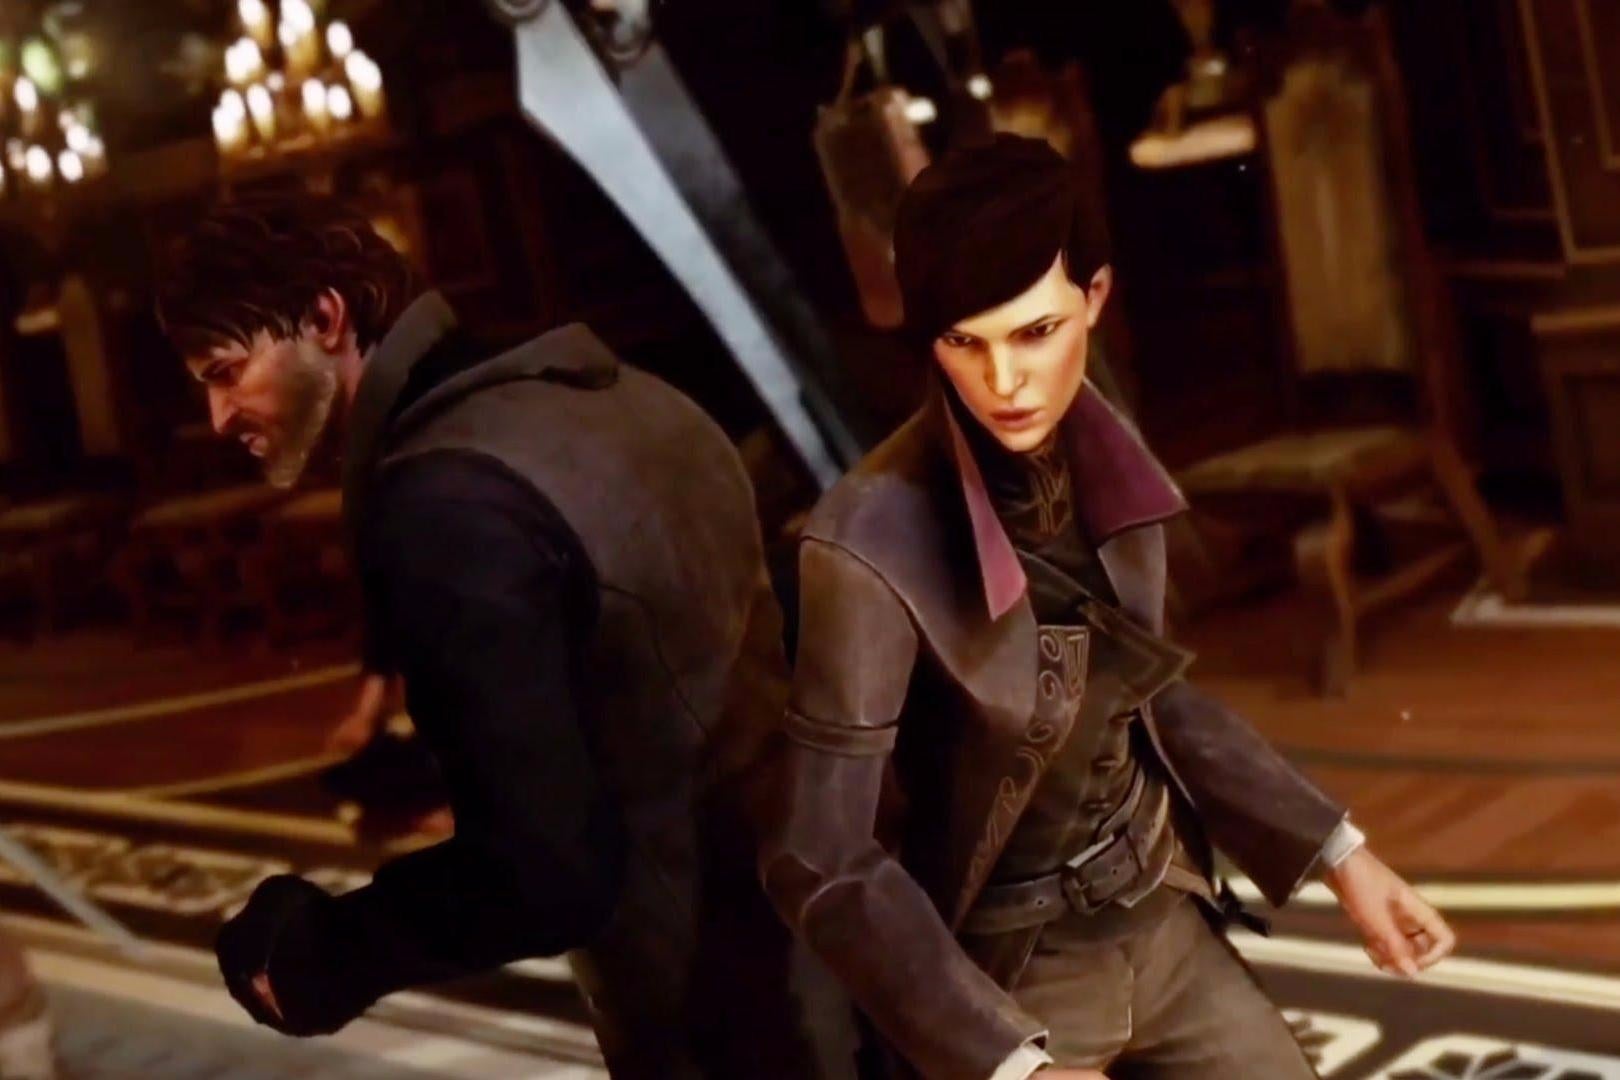 Image for Dishonored 2 is getting a lengthy free trial this week